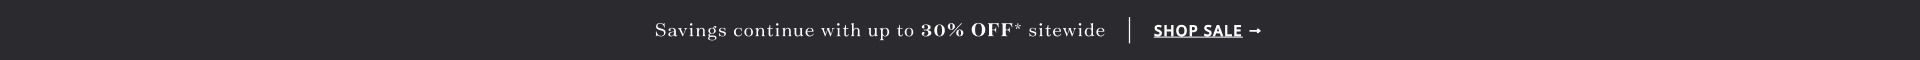 Save up to 30% Off sitewide | Shop Sale